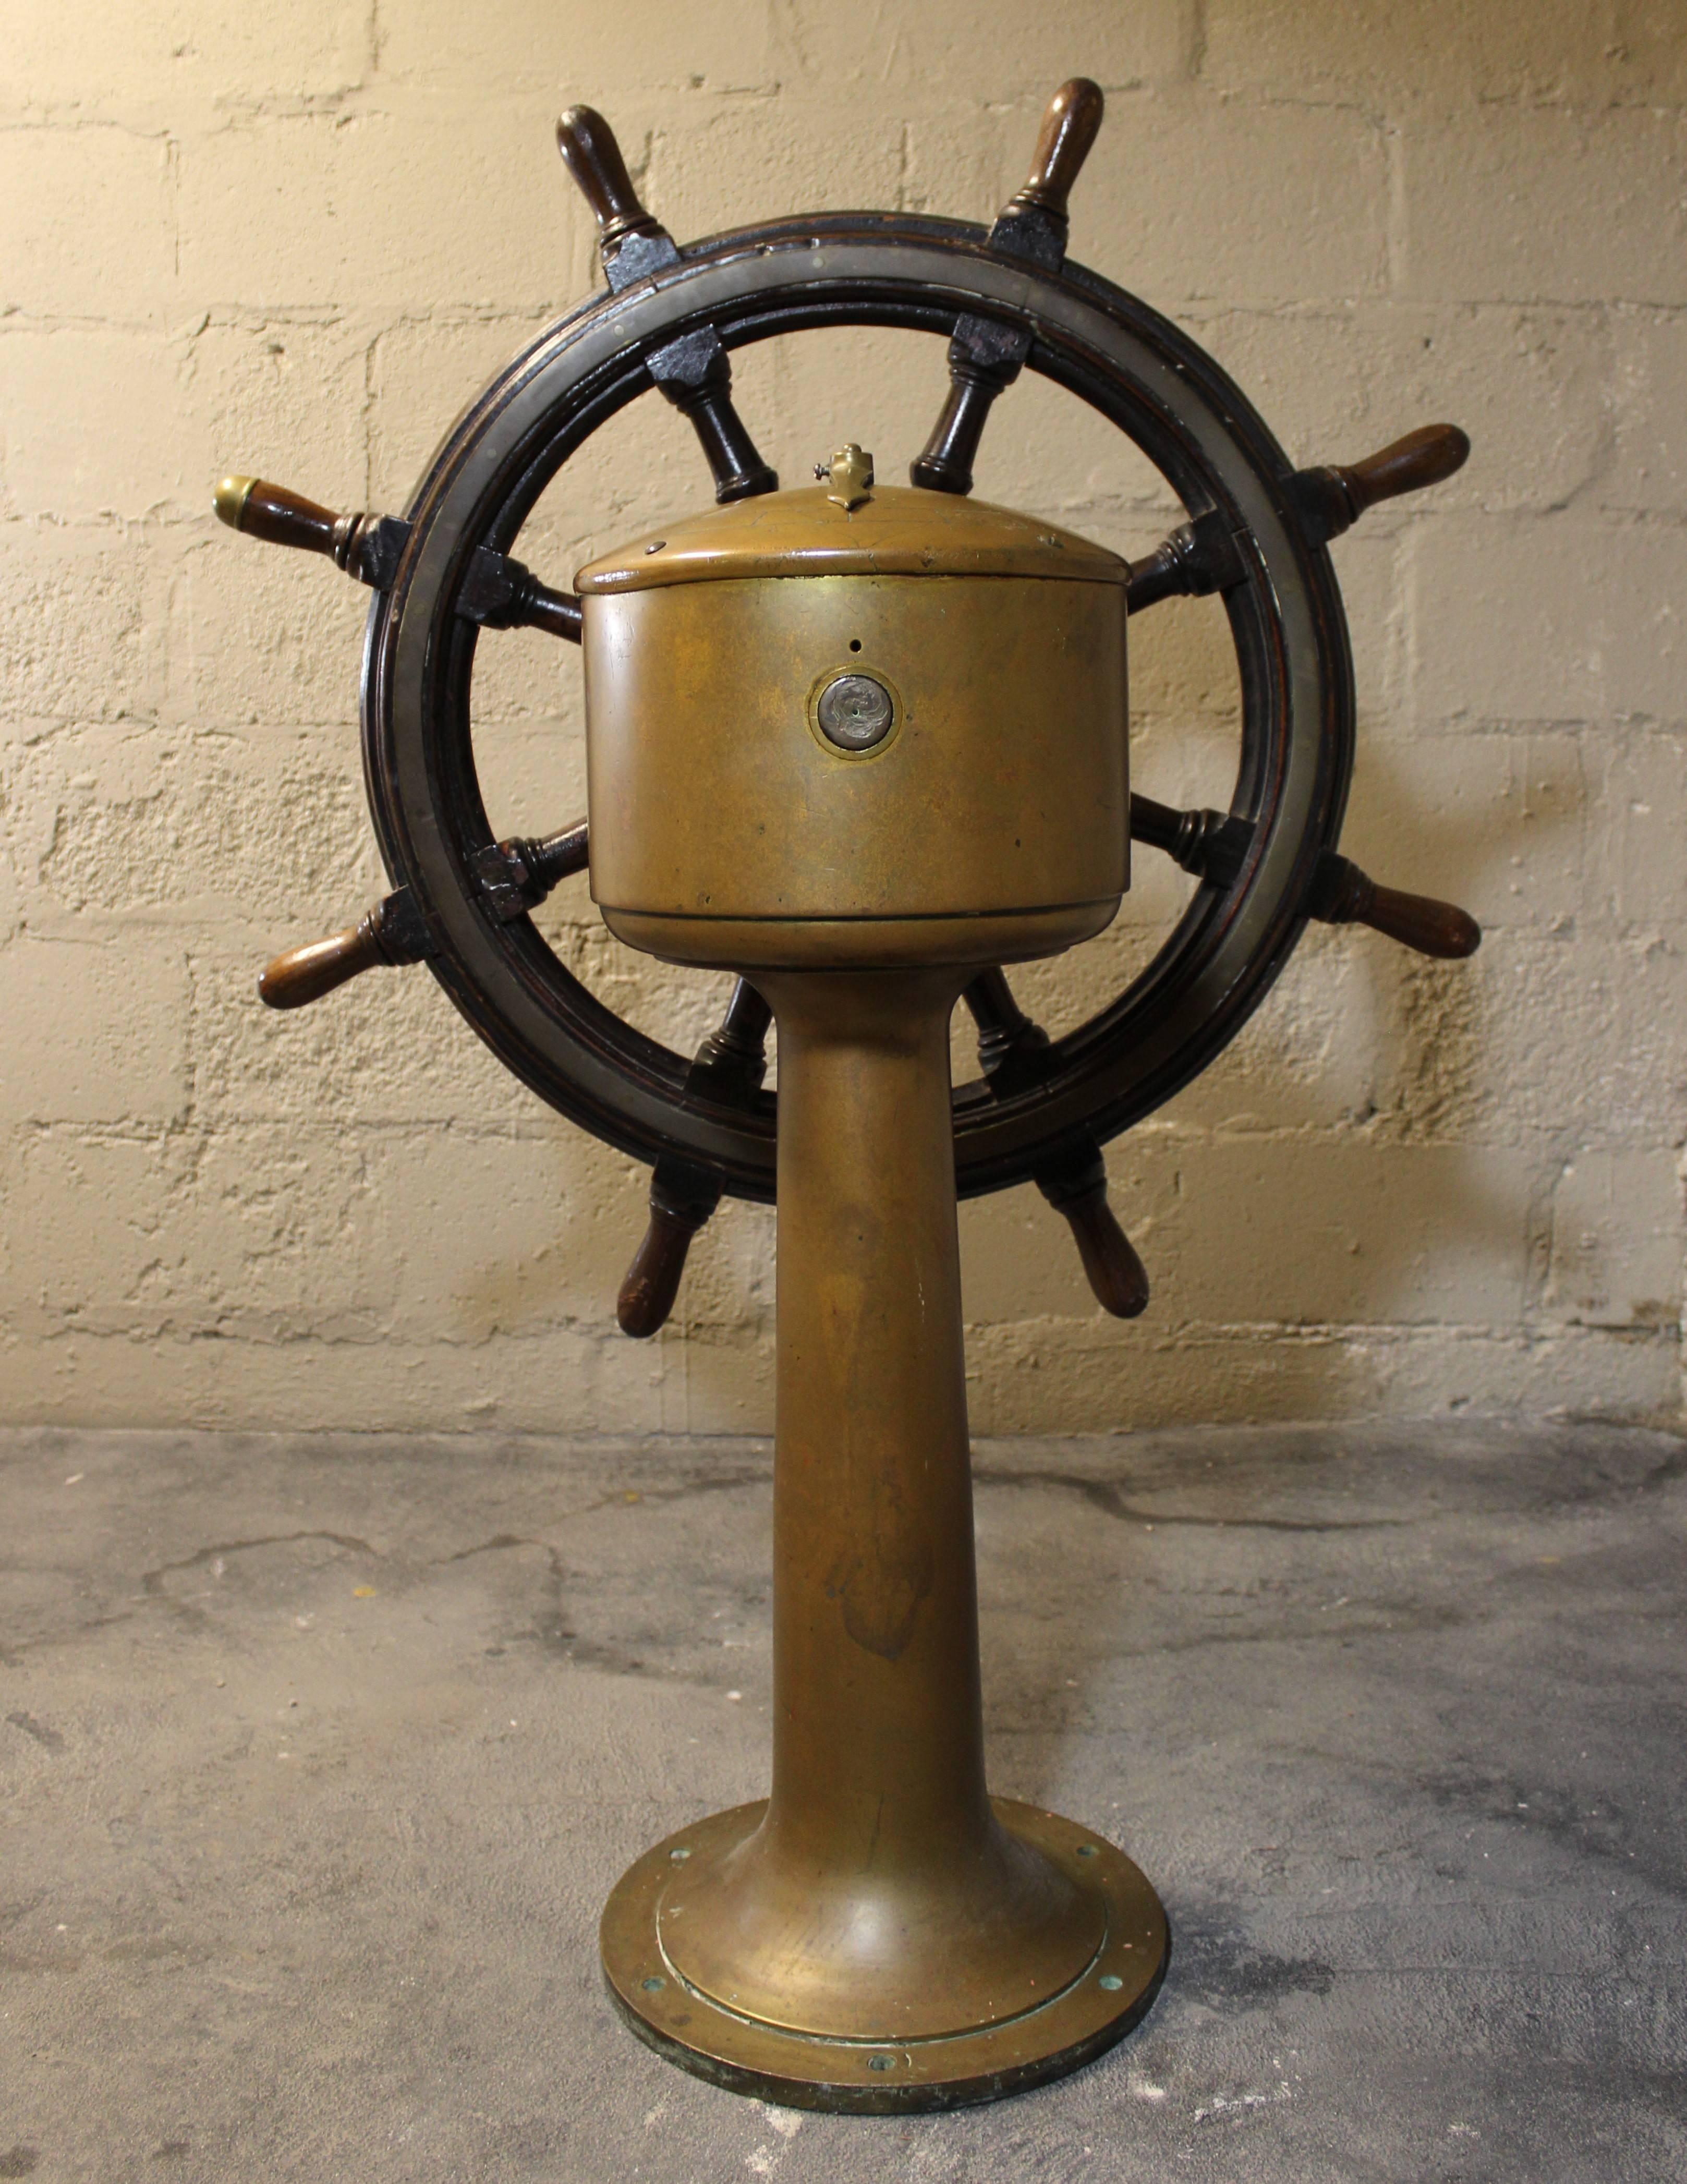 English ship's wheel and steering pedestal made by Robert Roger & Co. Stockton-On-Tees.